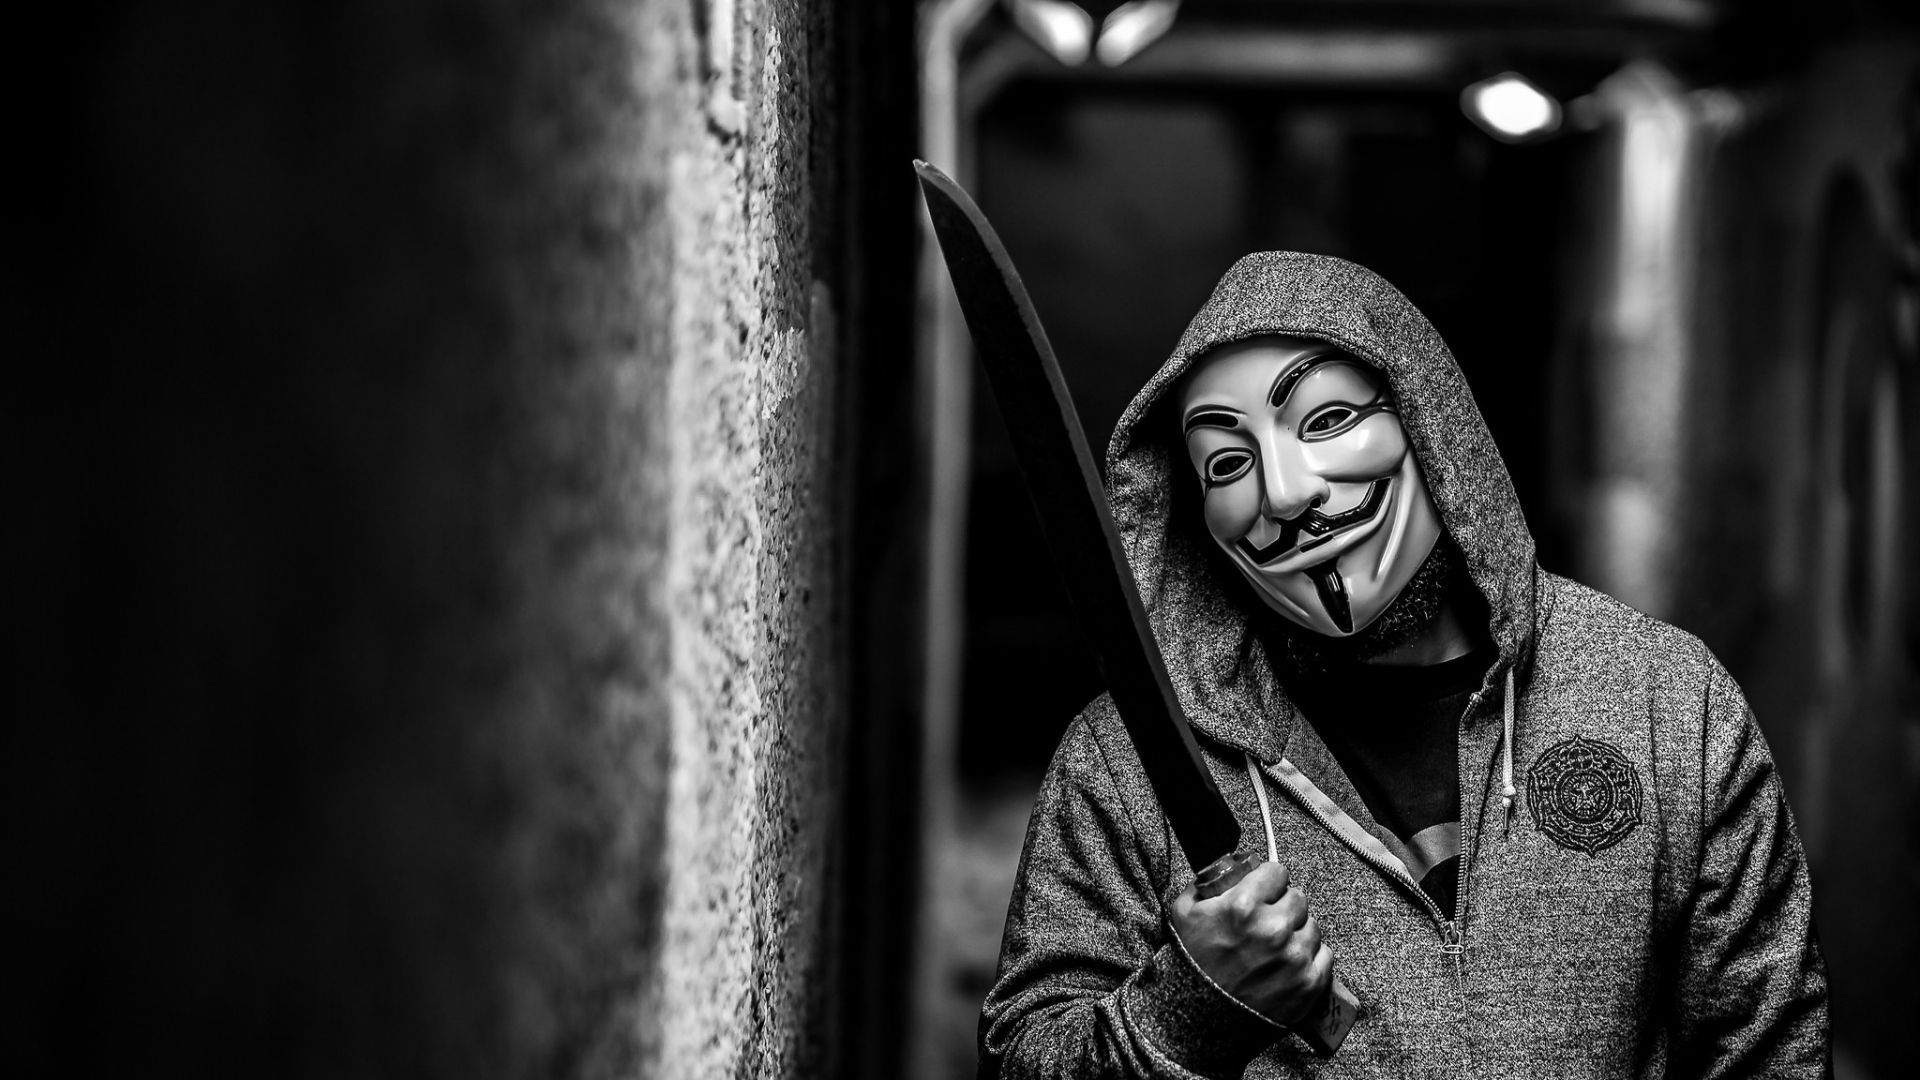 Download Wallpaper 1920x1080 Anonymous, Guy fawkes mask, Mask